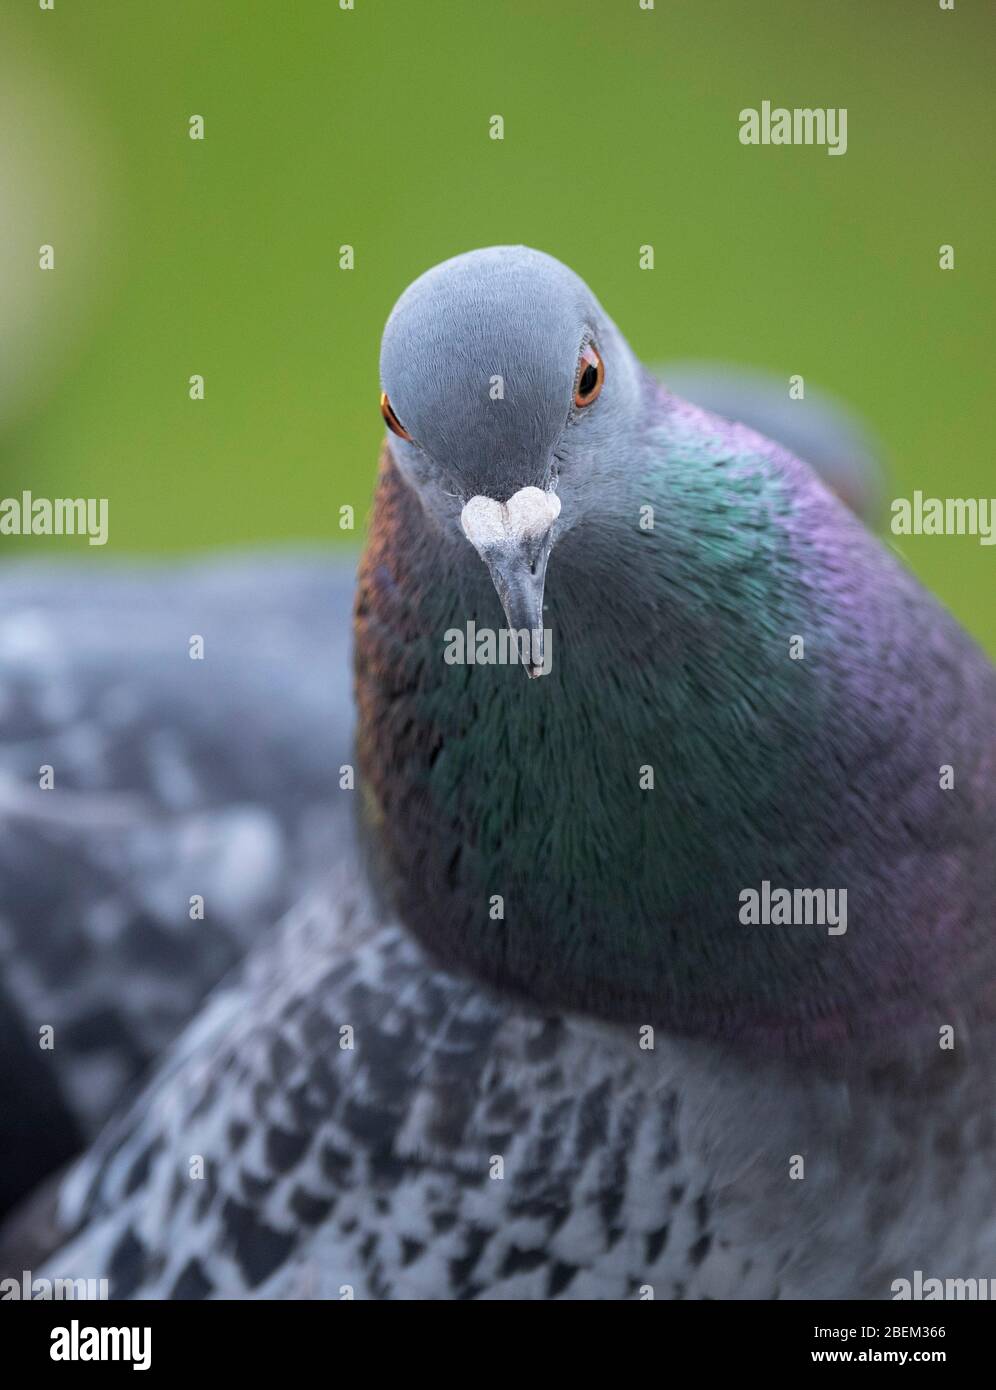 Closeup of Feral pigeon in a suburban London garden. Credit: Malcolm Park/Alamy Stock Photo